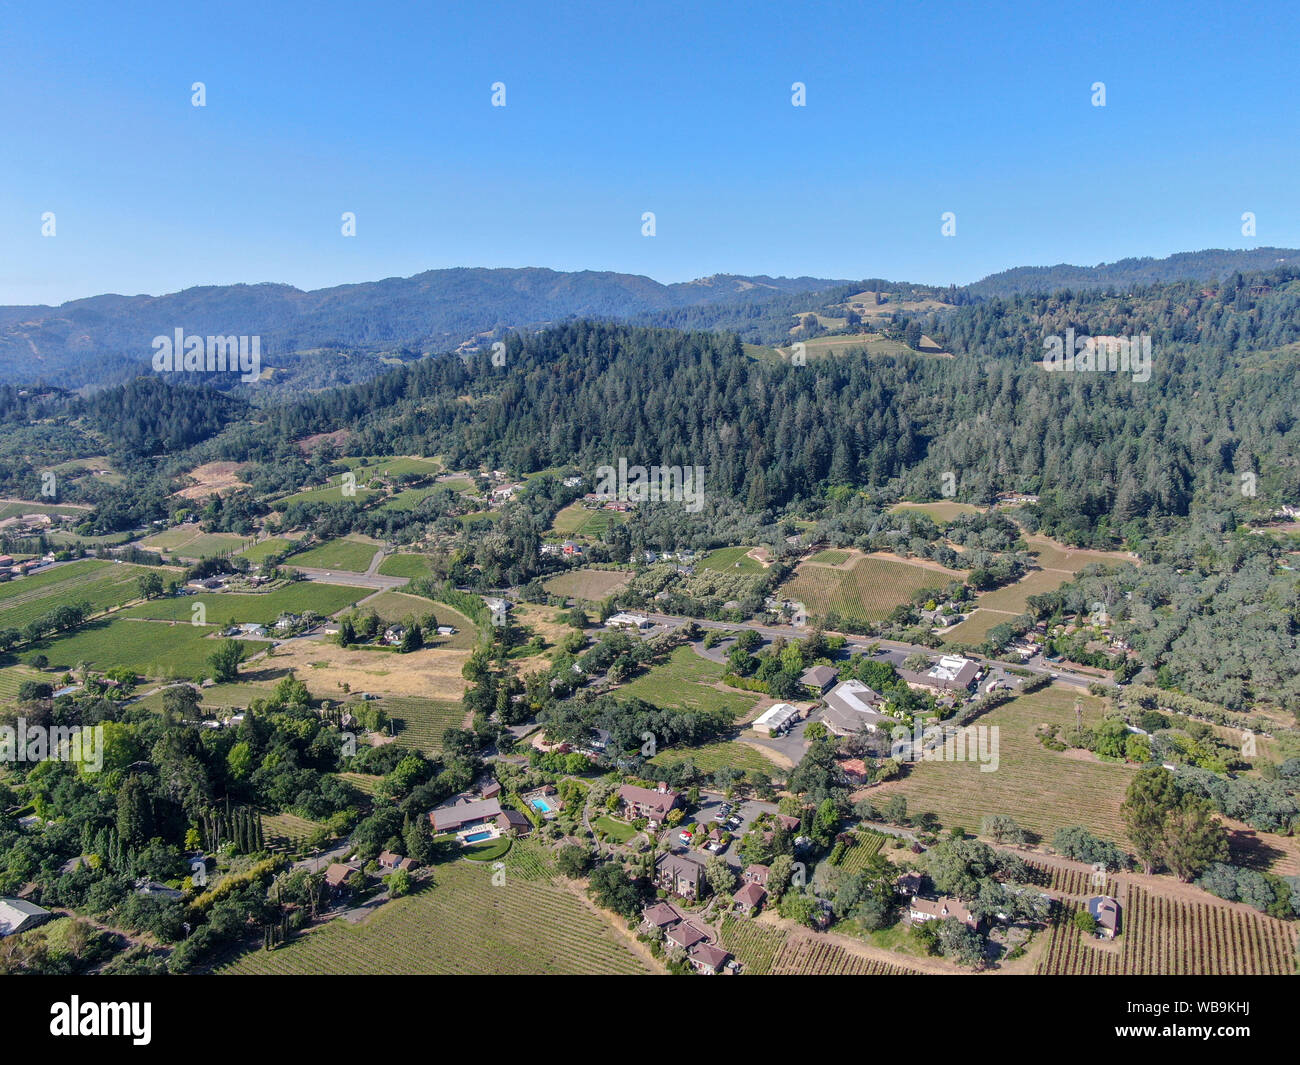 Aerial view of vineyard in Napa Valley. Napa County, in California's Wine Country. Vineyards landscape. Stock Photo